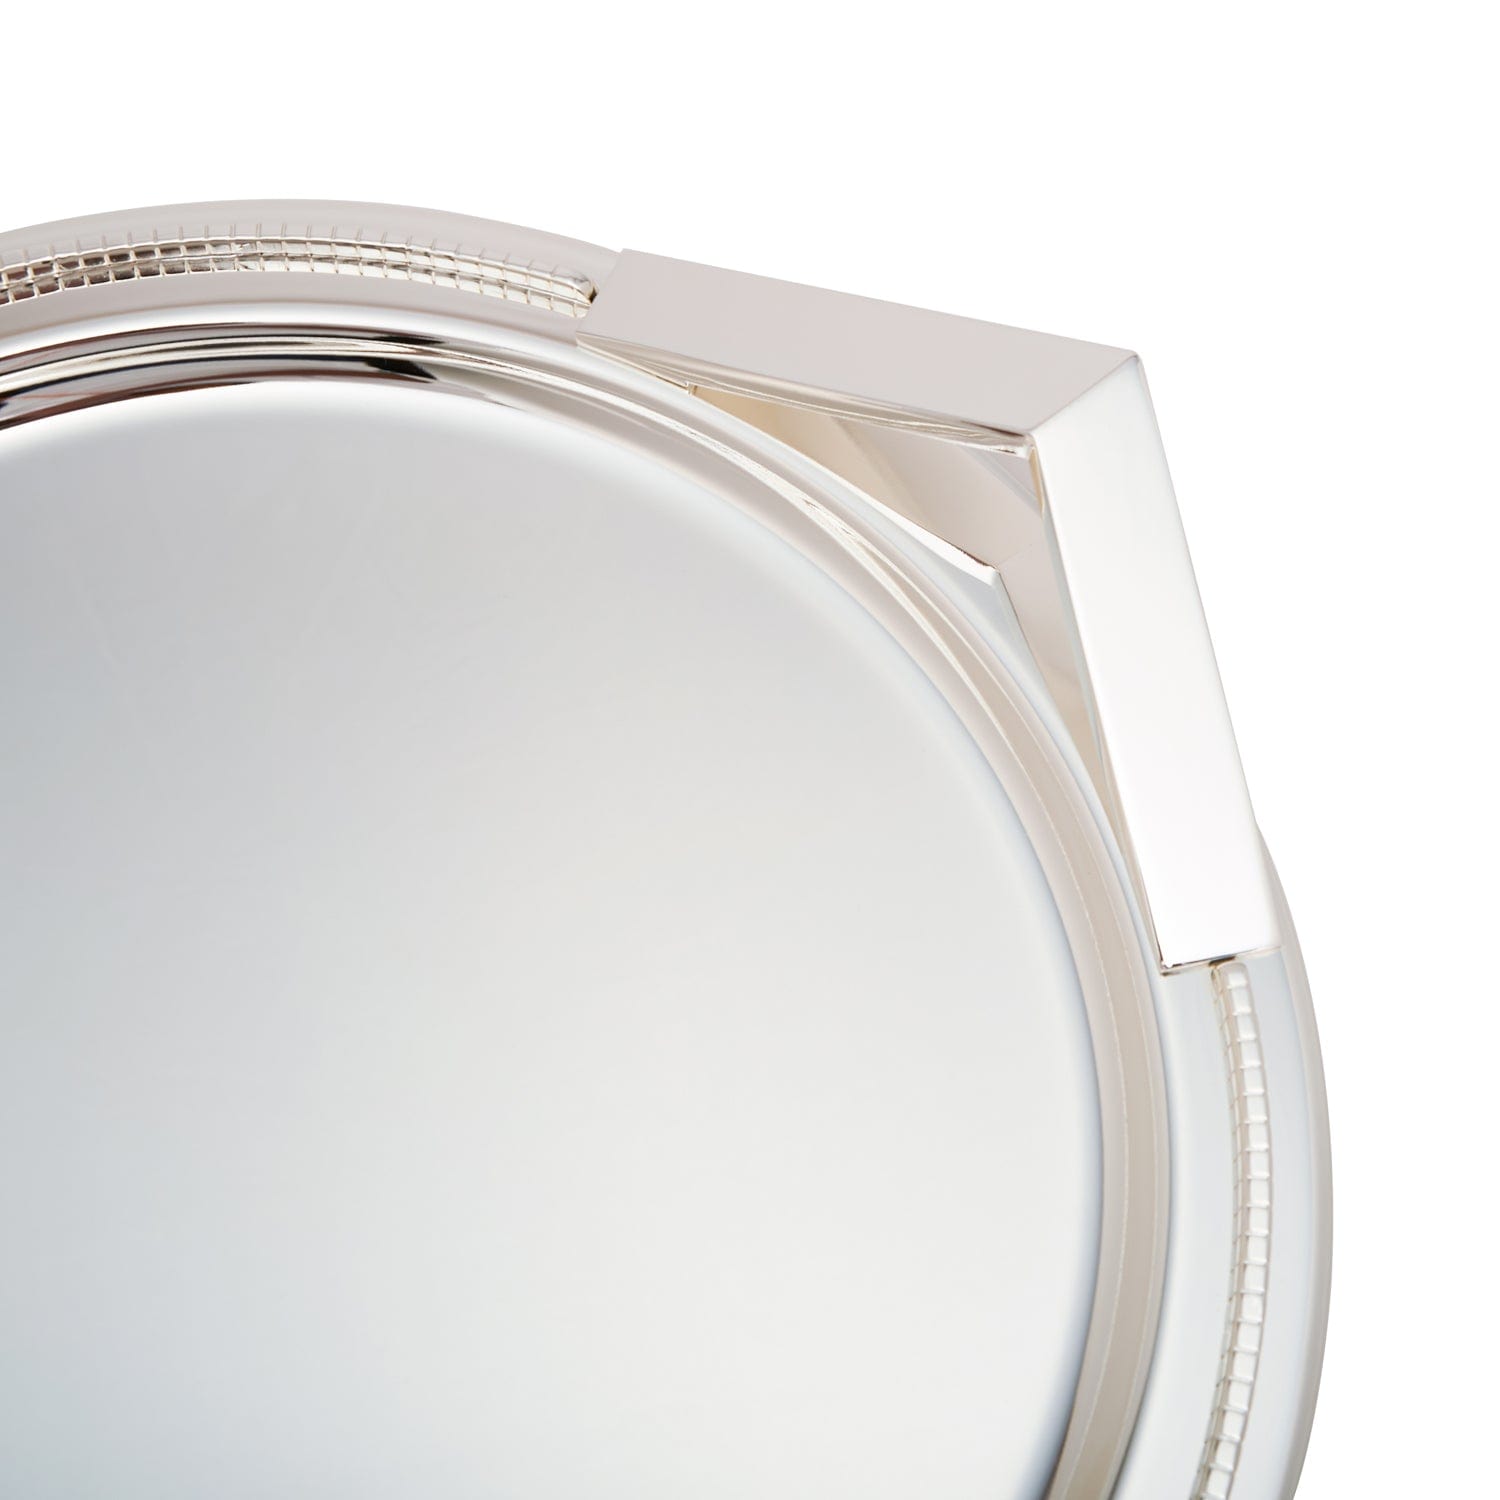 Pantazelos Cubic Silverplated Round Tray - NG-3080/SP